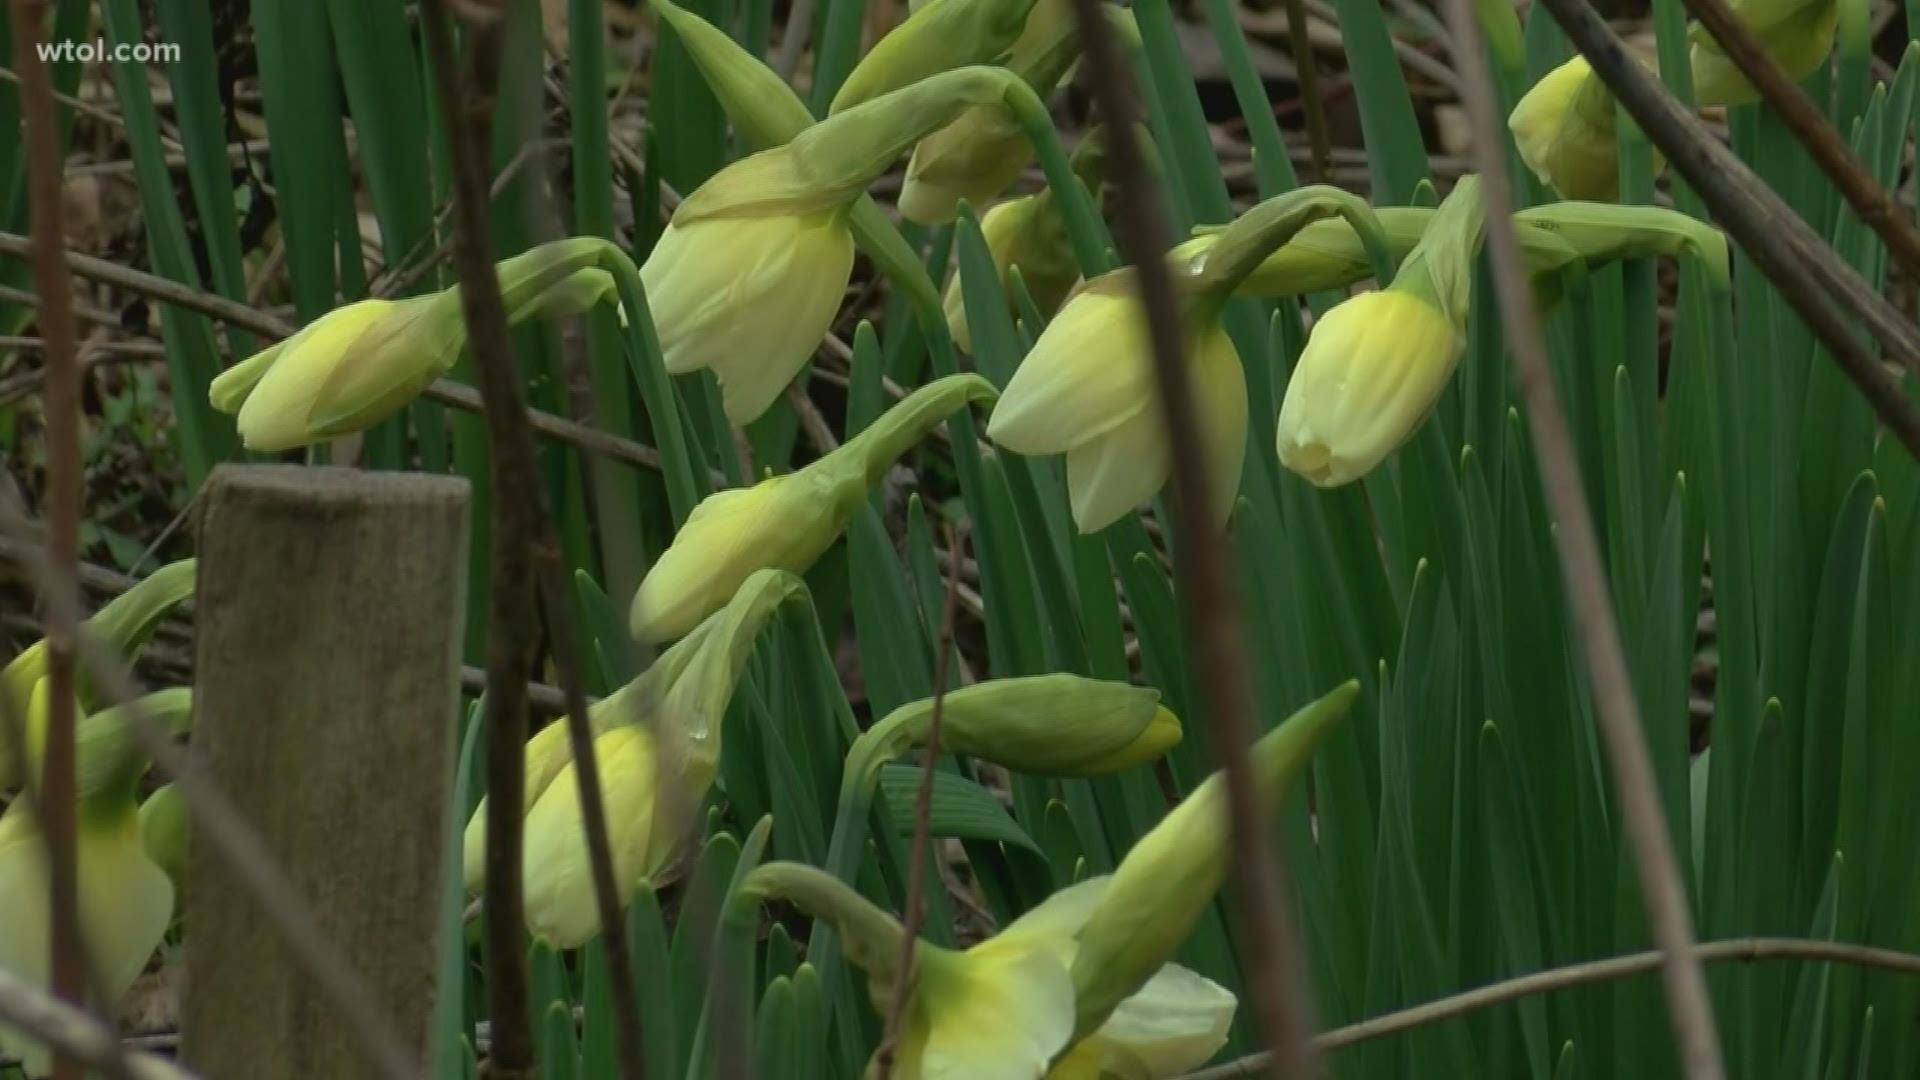 Because right now, we need it: The sights and sounds of the nature at Sawyer Quarry Nature Preserve, captured by WTOL 11 photojournalist John Juby.